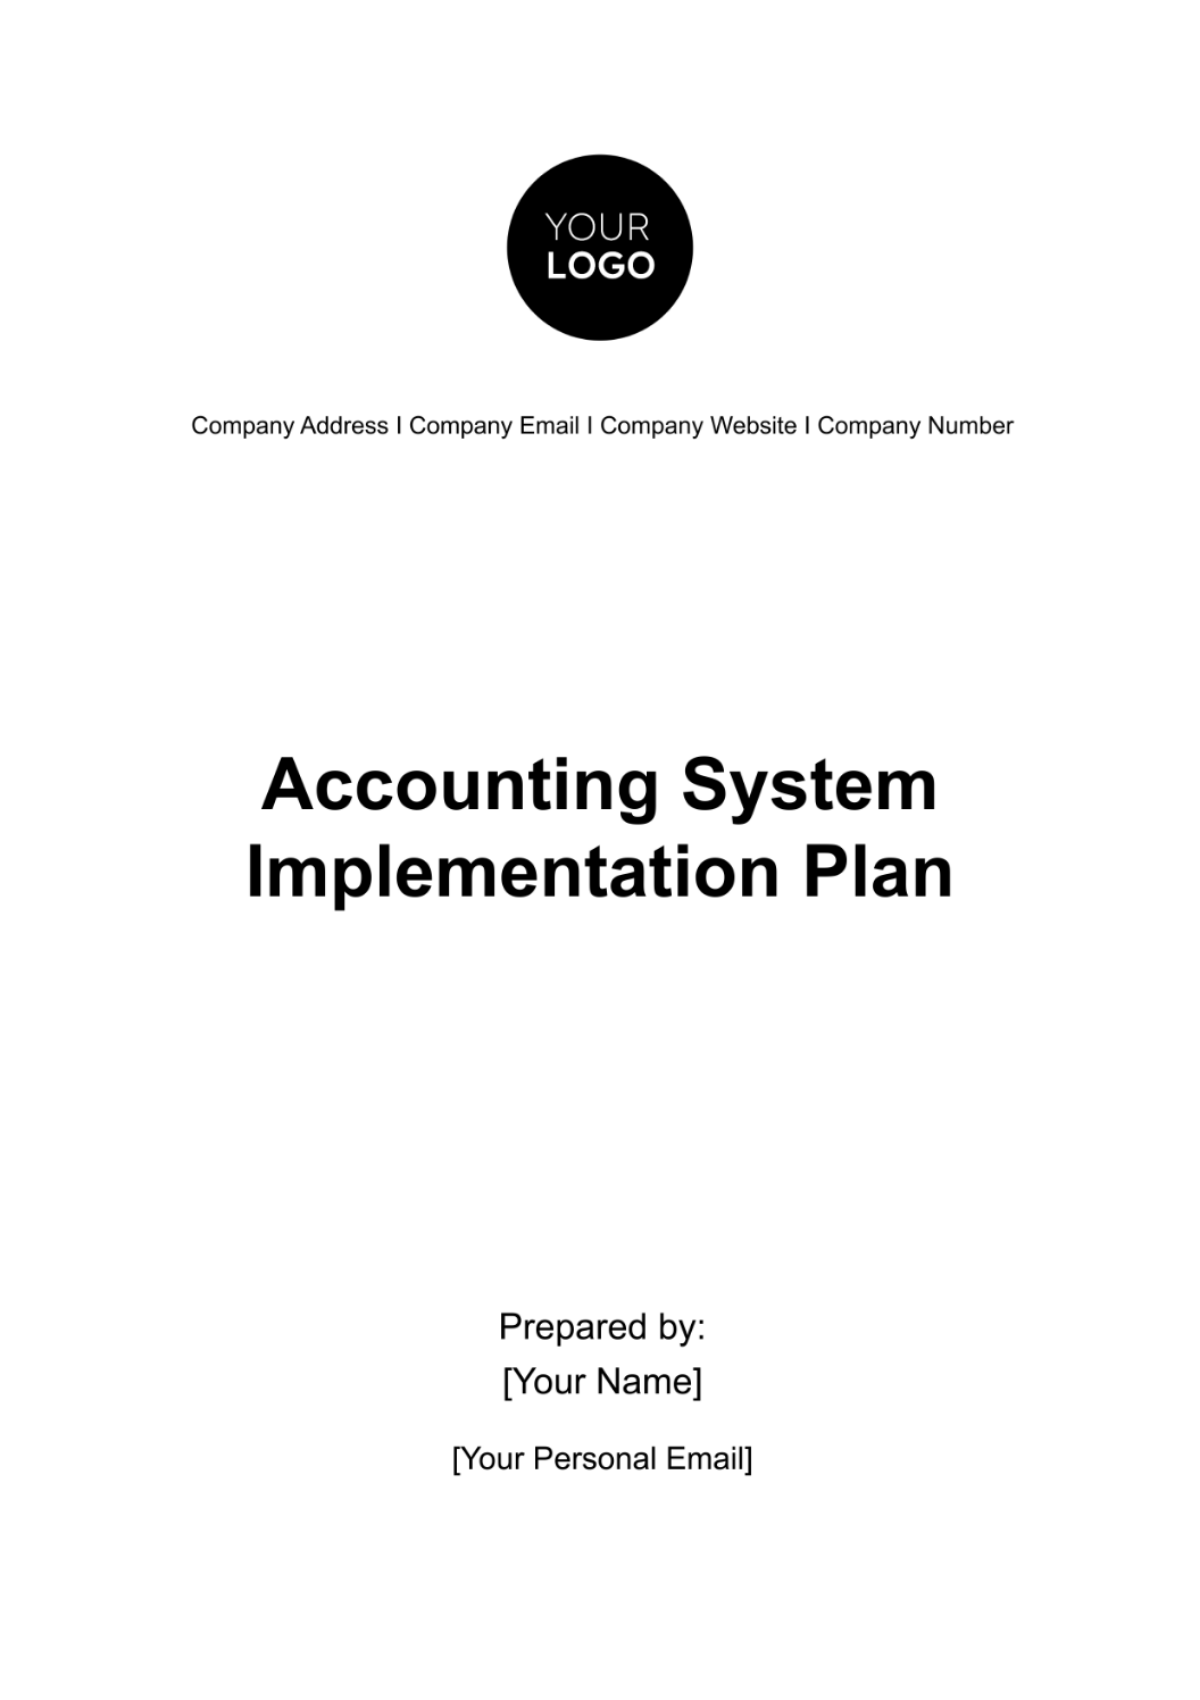 Free Accounting System Implementation Plan Template